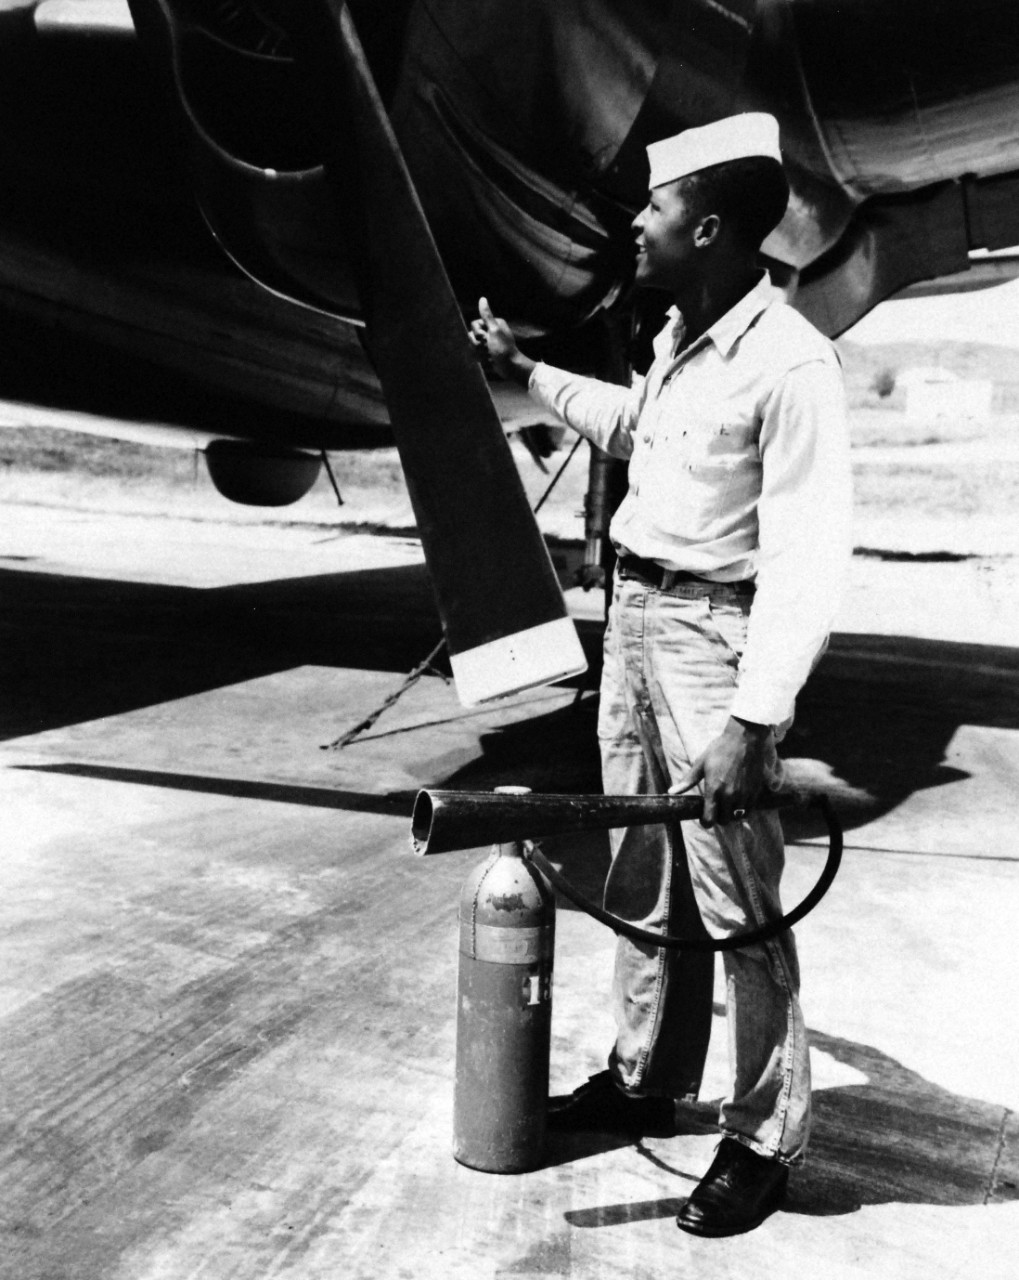 80-G-413553:   U.S. Naval Air Station, Roosevelt Roads, Puerto Rico, August 1949.   RM2 William Moore, who serves as a lineman with VP-5.  Photograph released August 1, 1949.  Official U.S. Navy photograph, now in the collections of the National Archives.  